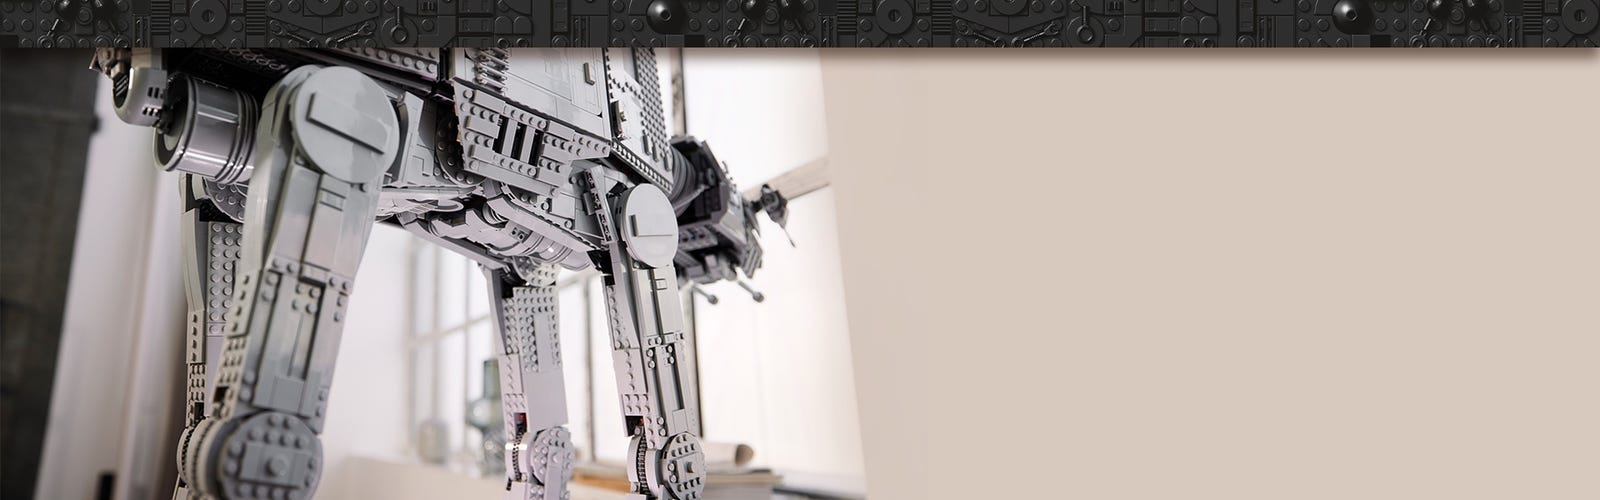 AT-AT™ 75313 | Star Wars™ | Buy online at the Official LEGO® Shop US